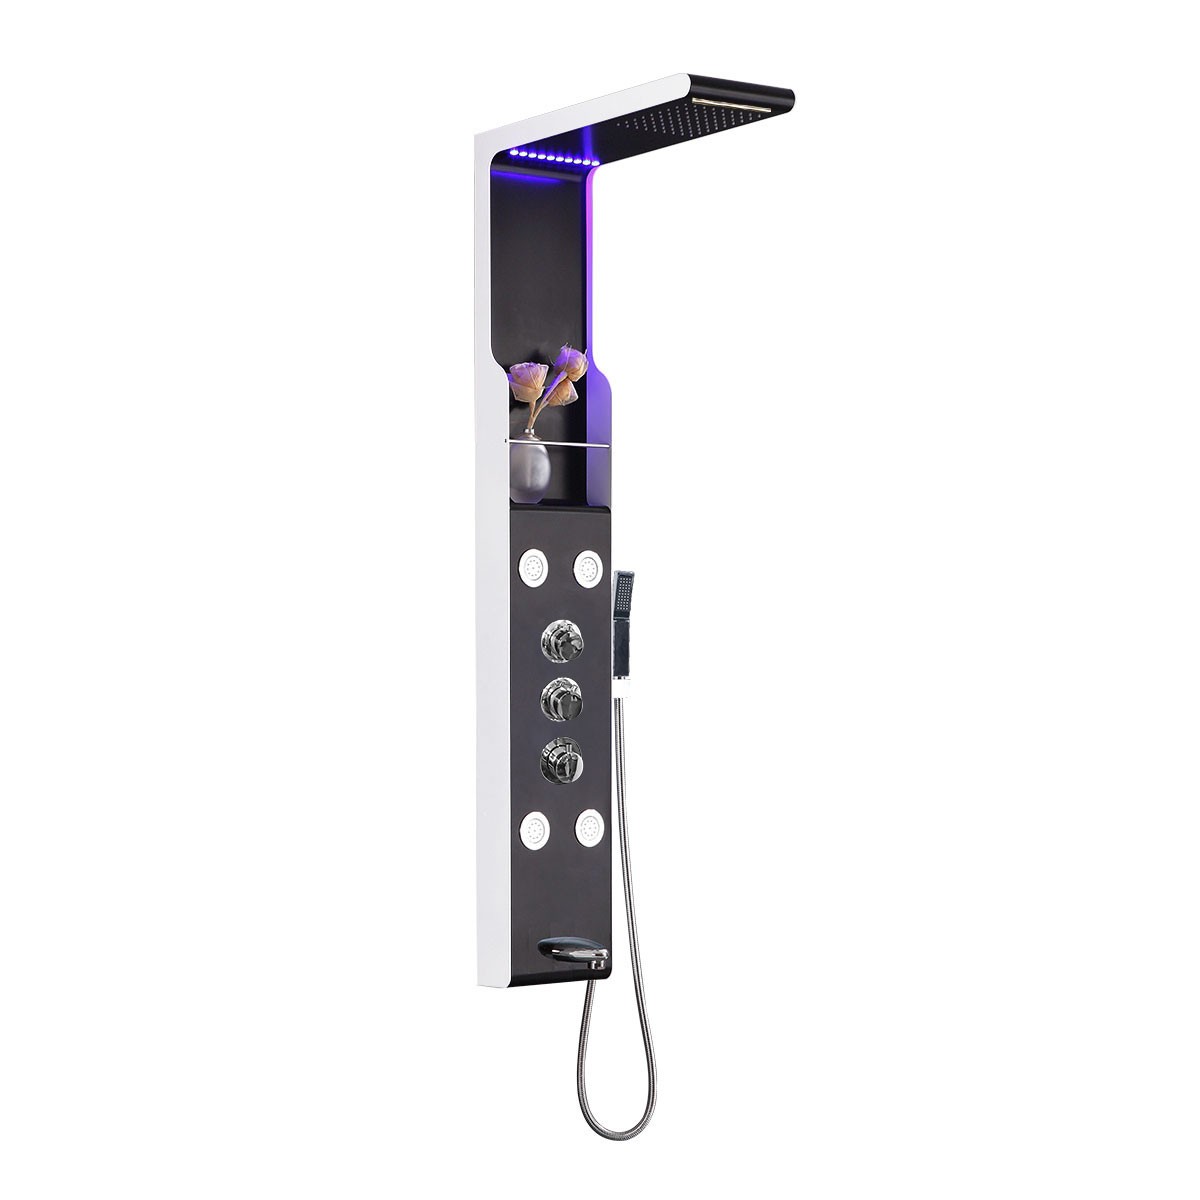 Black Stainless Steel Thermostatic LED Shower Panel System (LYB-5503-HB)